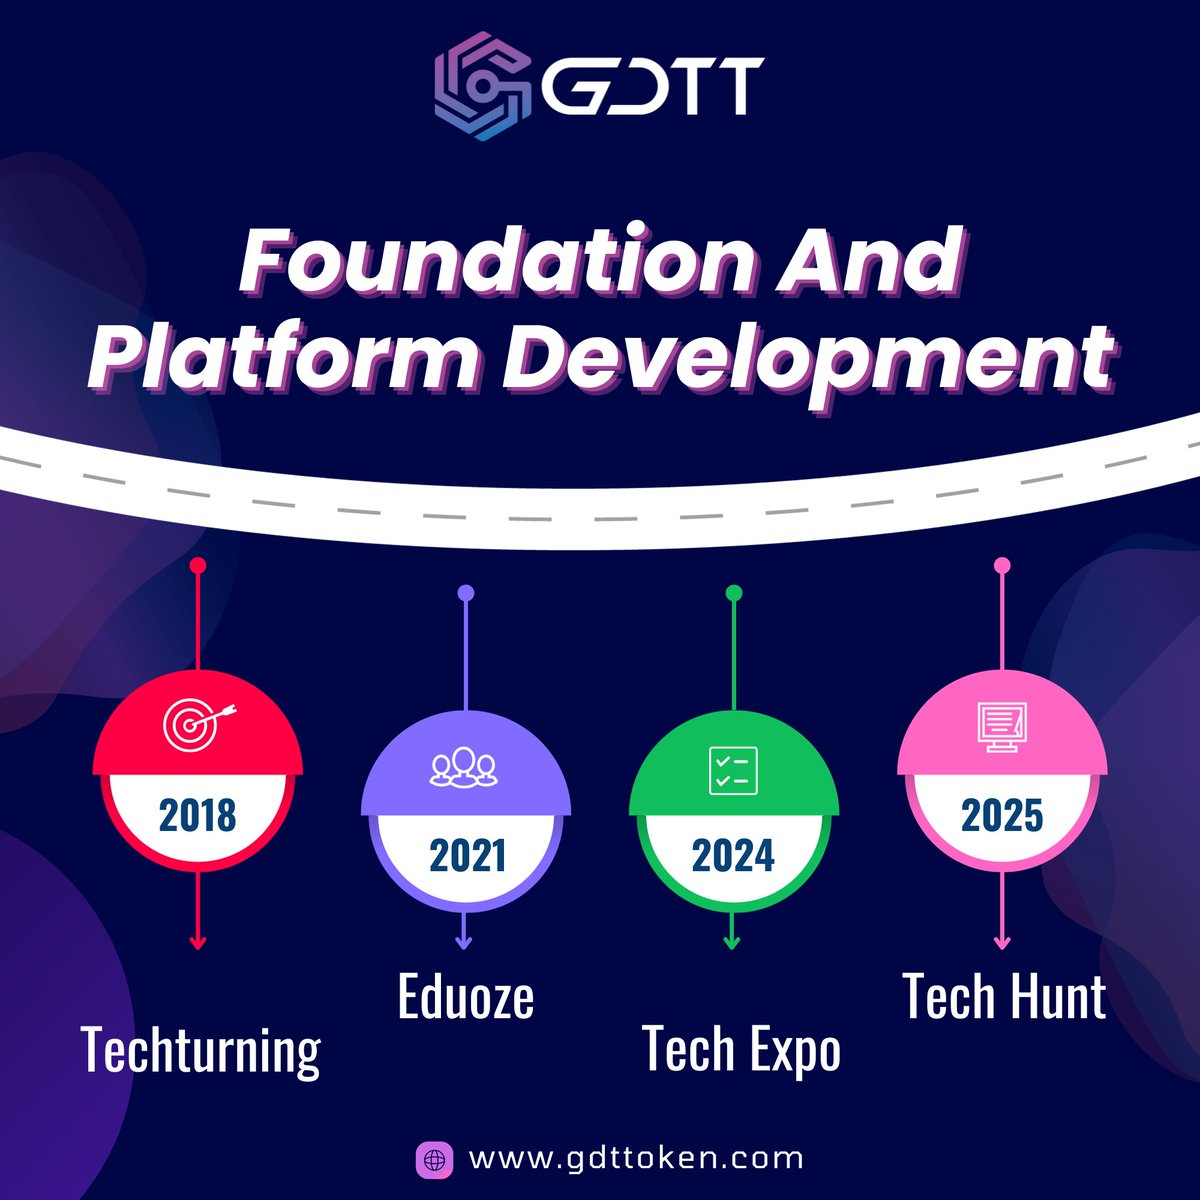 Explore the potential of #GDTTProject and be a part of the digital revolution.
Visit our website :
gdttoken.com
#GlobalNetworking #TechCommunity #TechInnovation #BlockchainRevolution #GDTTHub #TechRevolution #TechStartups #BlockchainTechnology #DigitalAssets